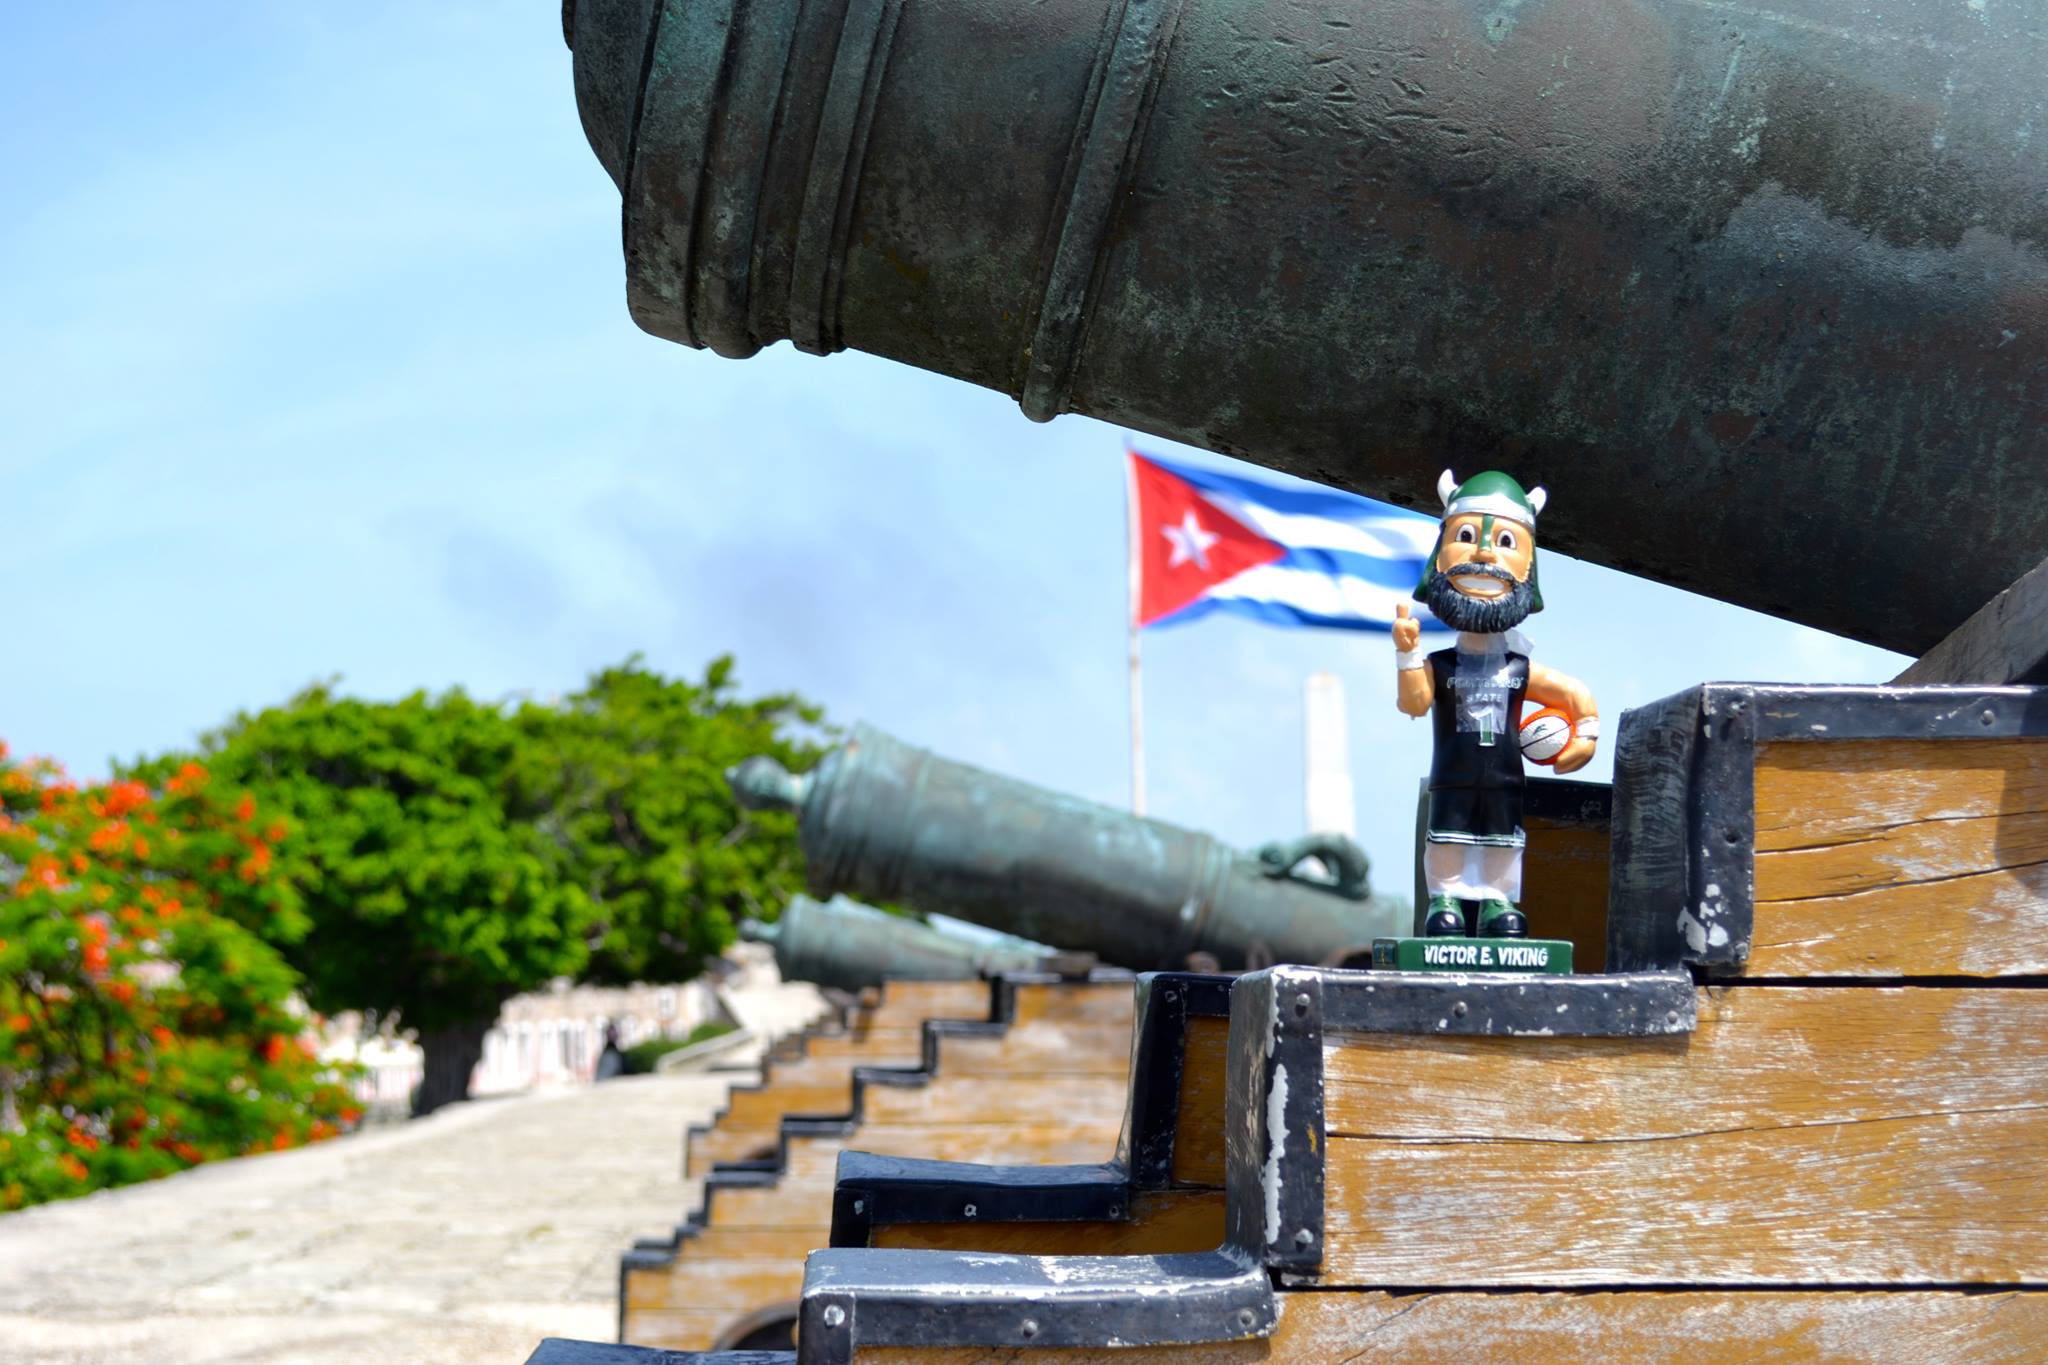 Victor Viking statue in front of Cuban flag